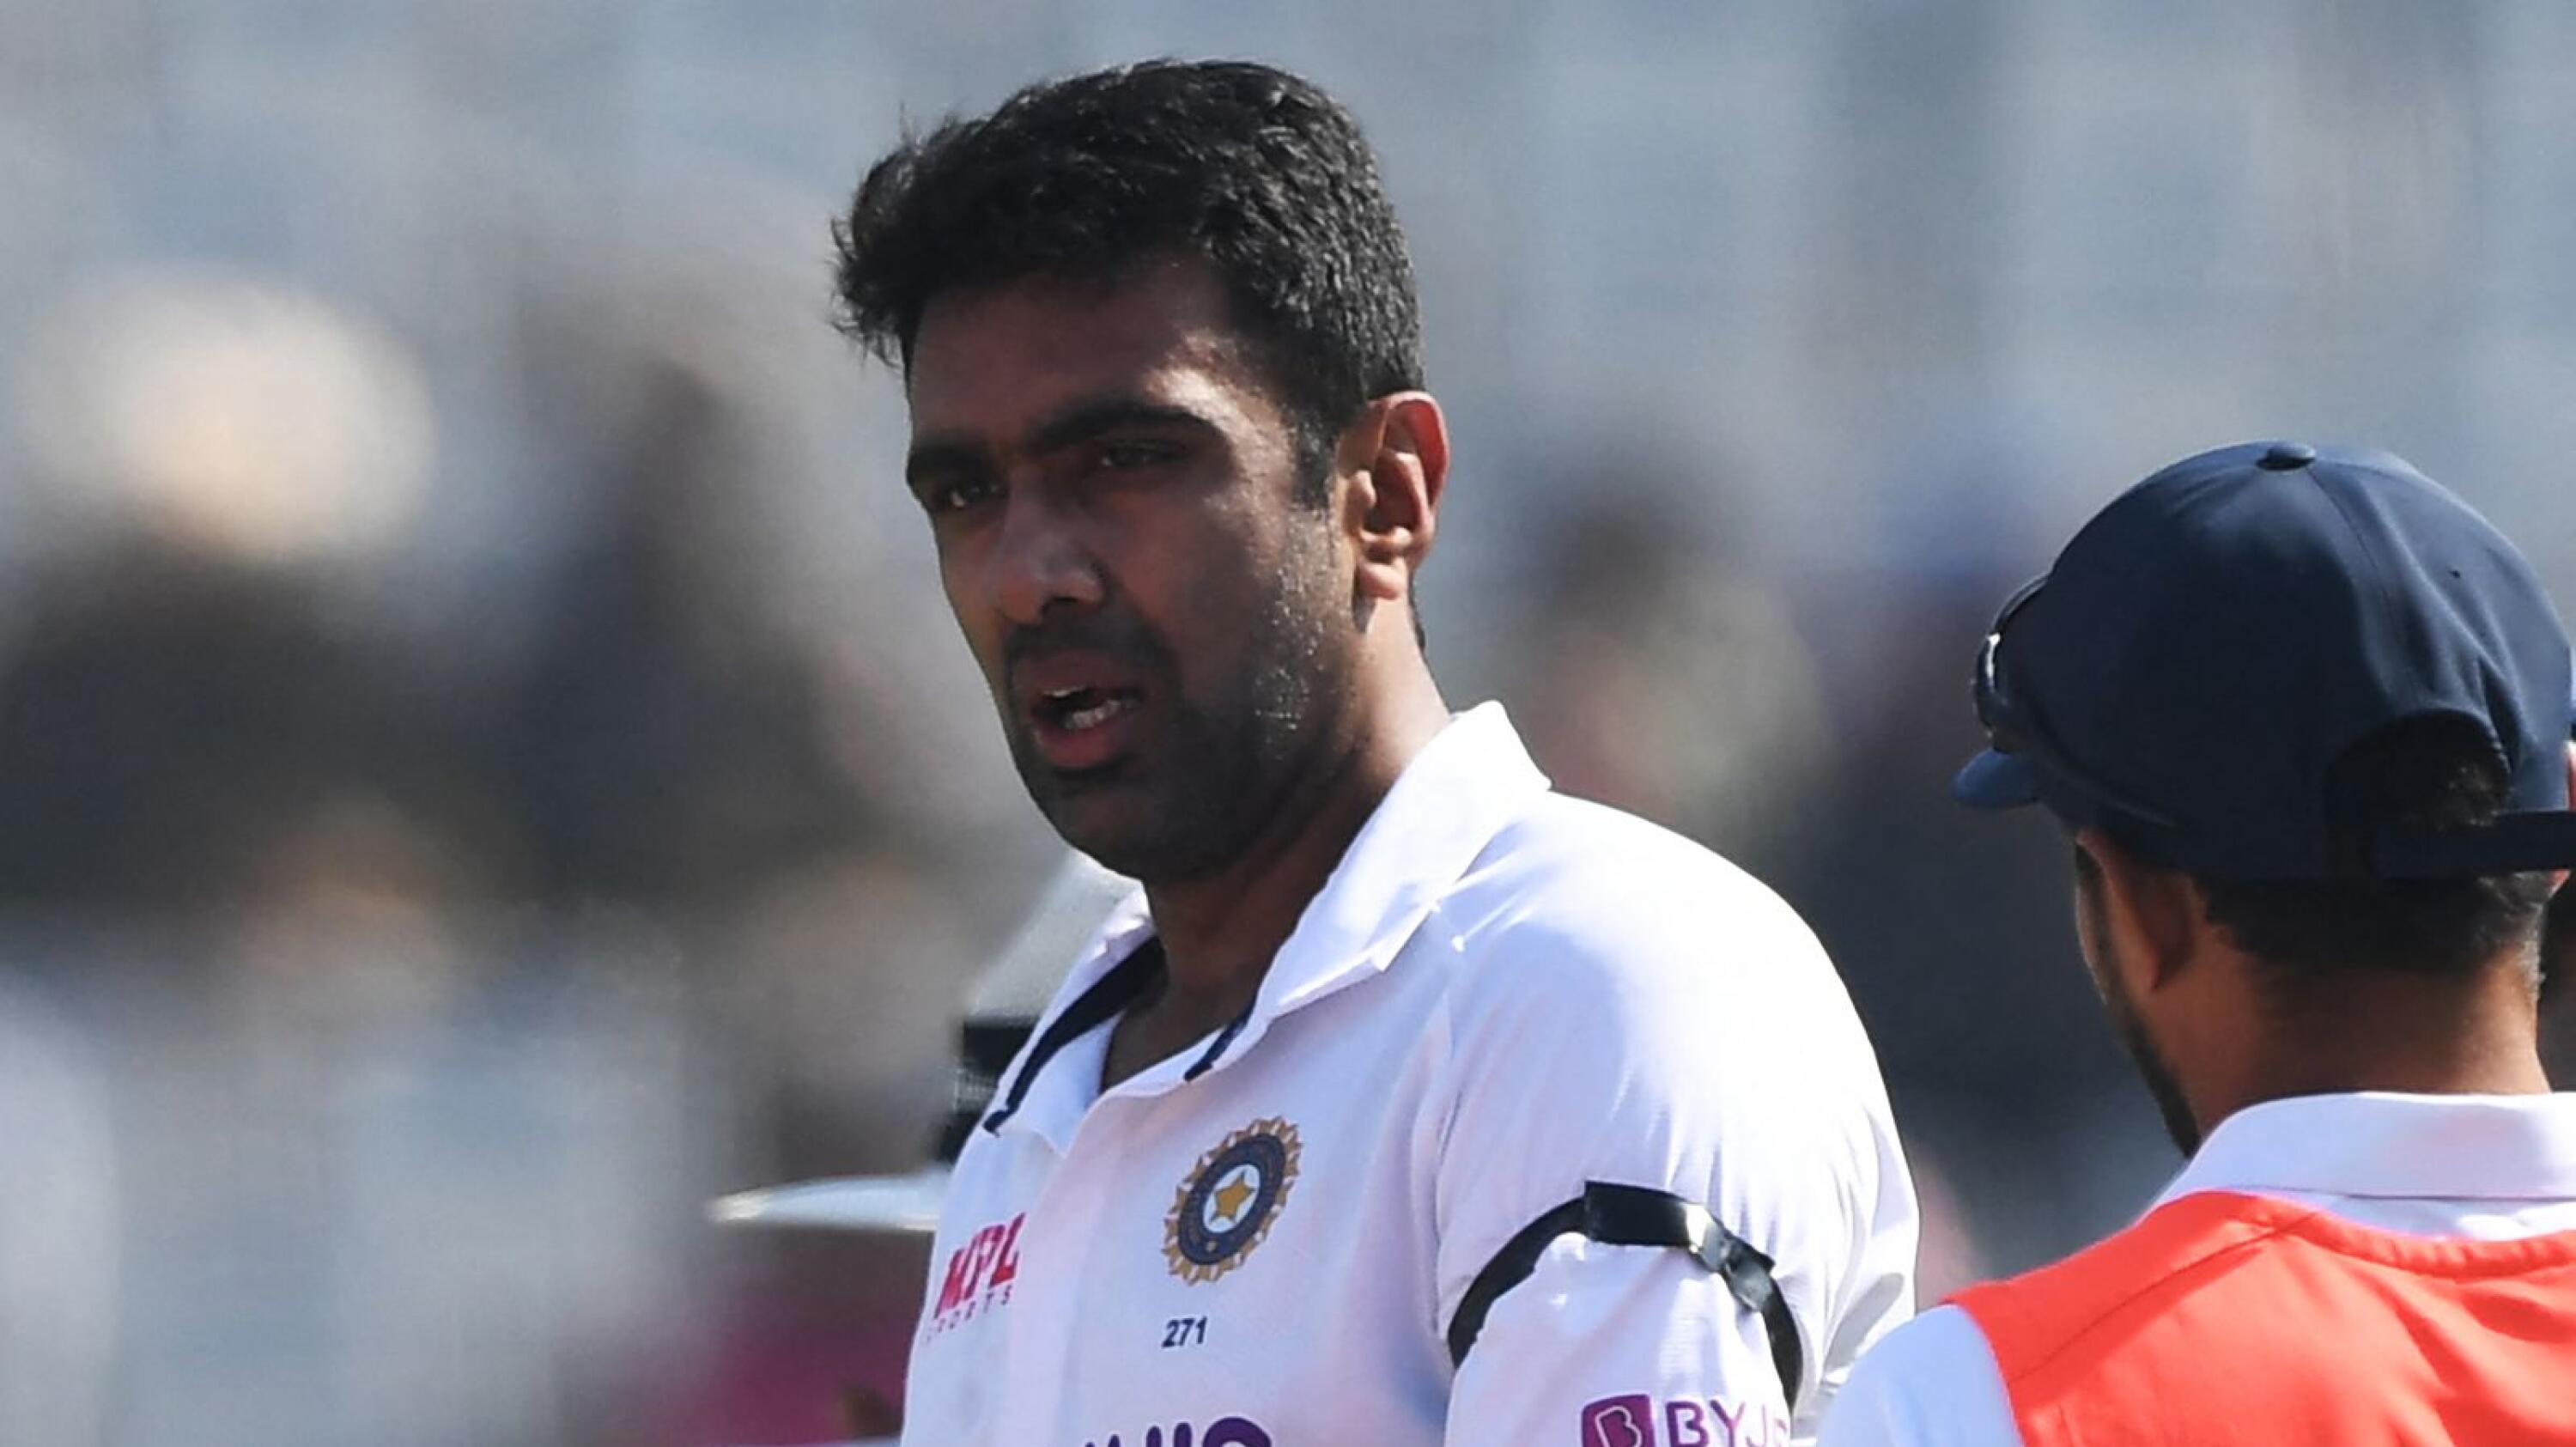 India's Ravichandran Ashwin looks on while wearing a black band to commemorate late former Australian cricketers Shane Warne and Rodney Marsh during a break of the second day of the first Test cricket match between India and Sri Lanka at the Punjab Cricket Association Stadium in Mohali on Saturday